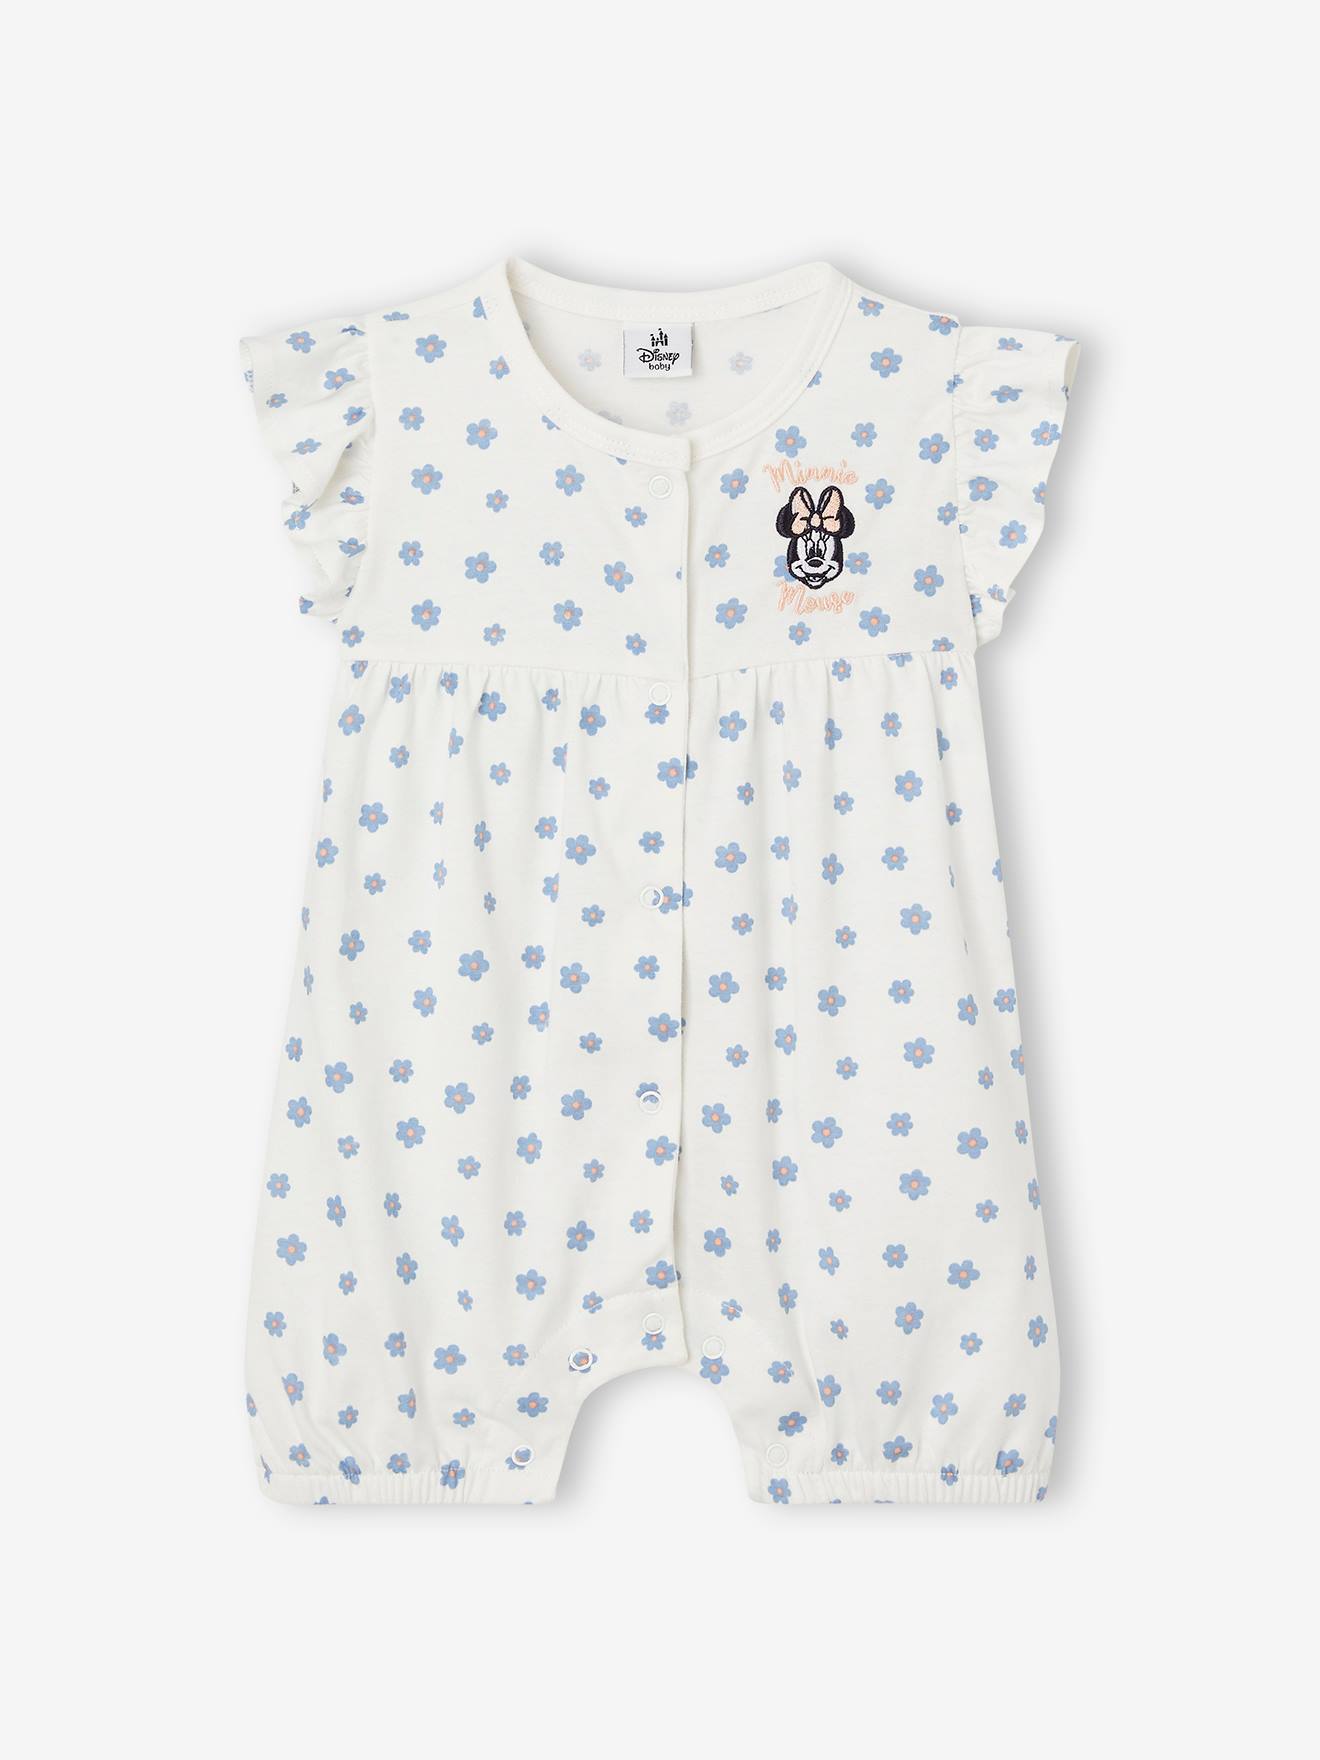 Minnie Mouse Playsuit for Baby Girls, by Disney(r) printed white